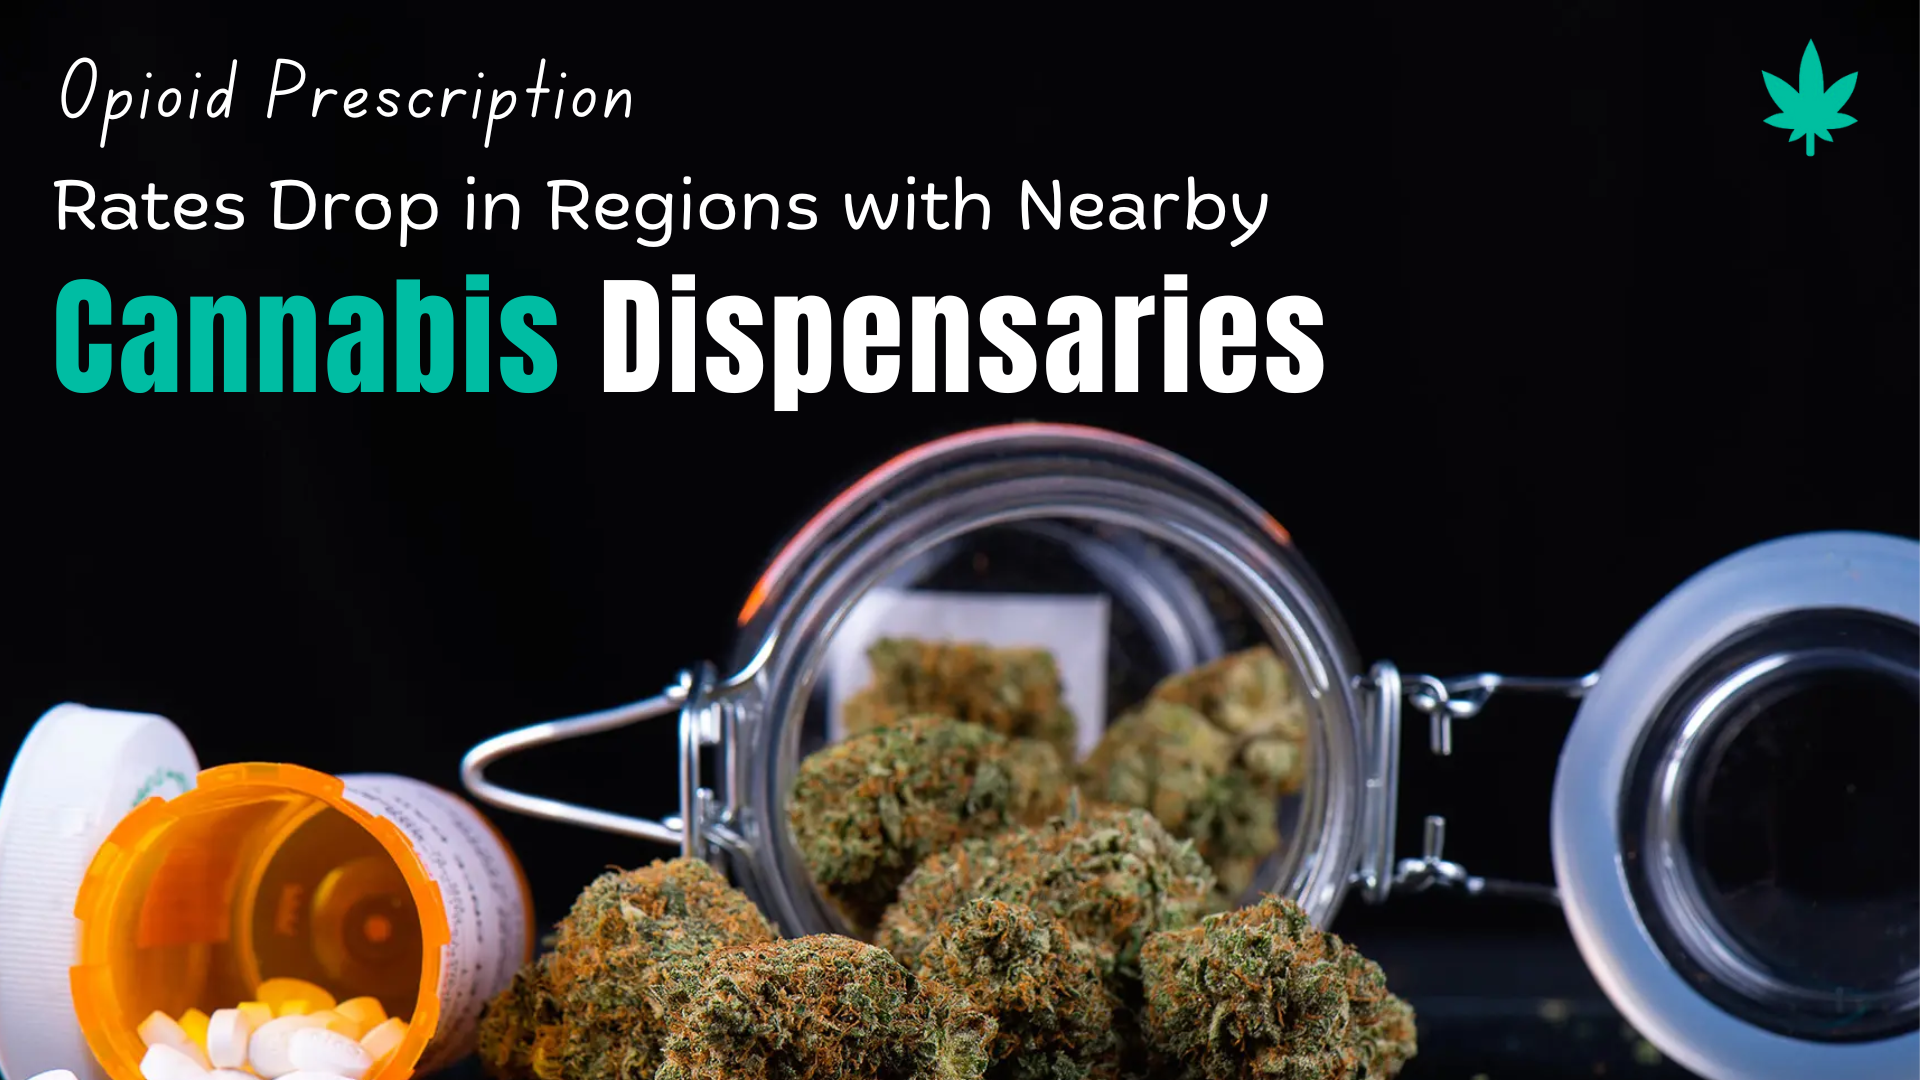 Opioid Prescription Rates Drop in Regions with Nearby Cannabis Dispensaries